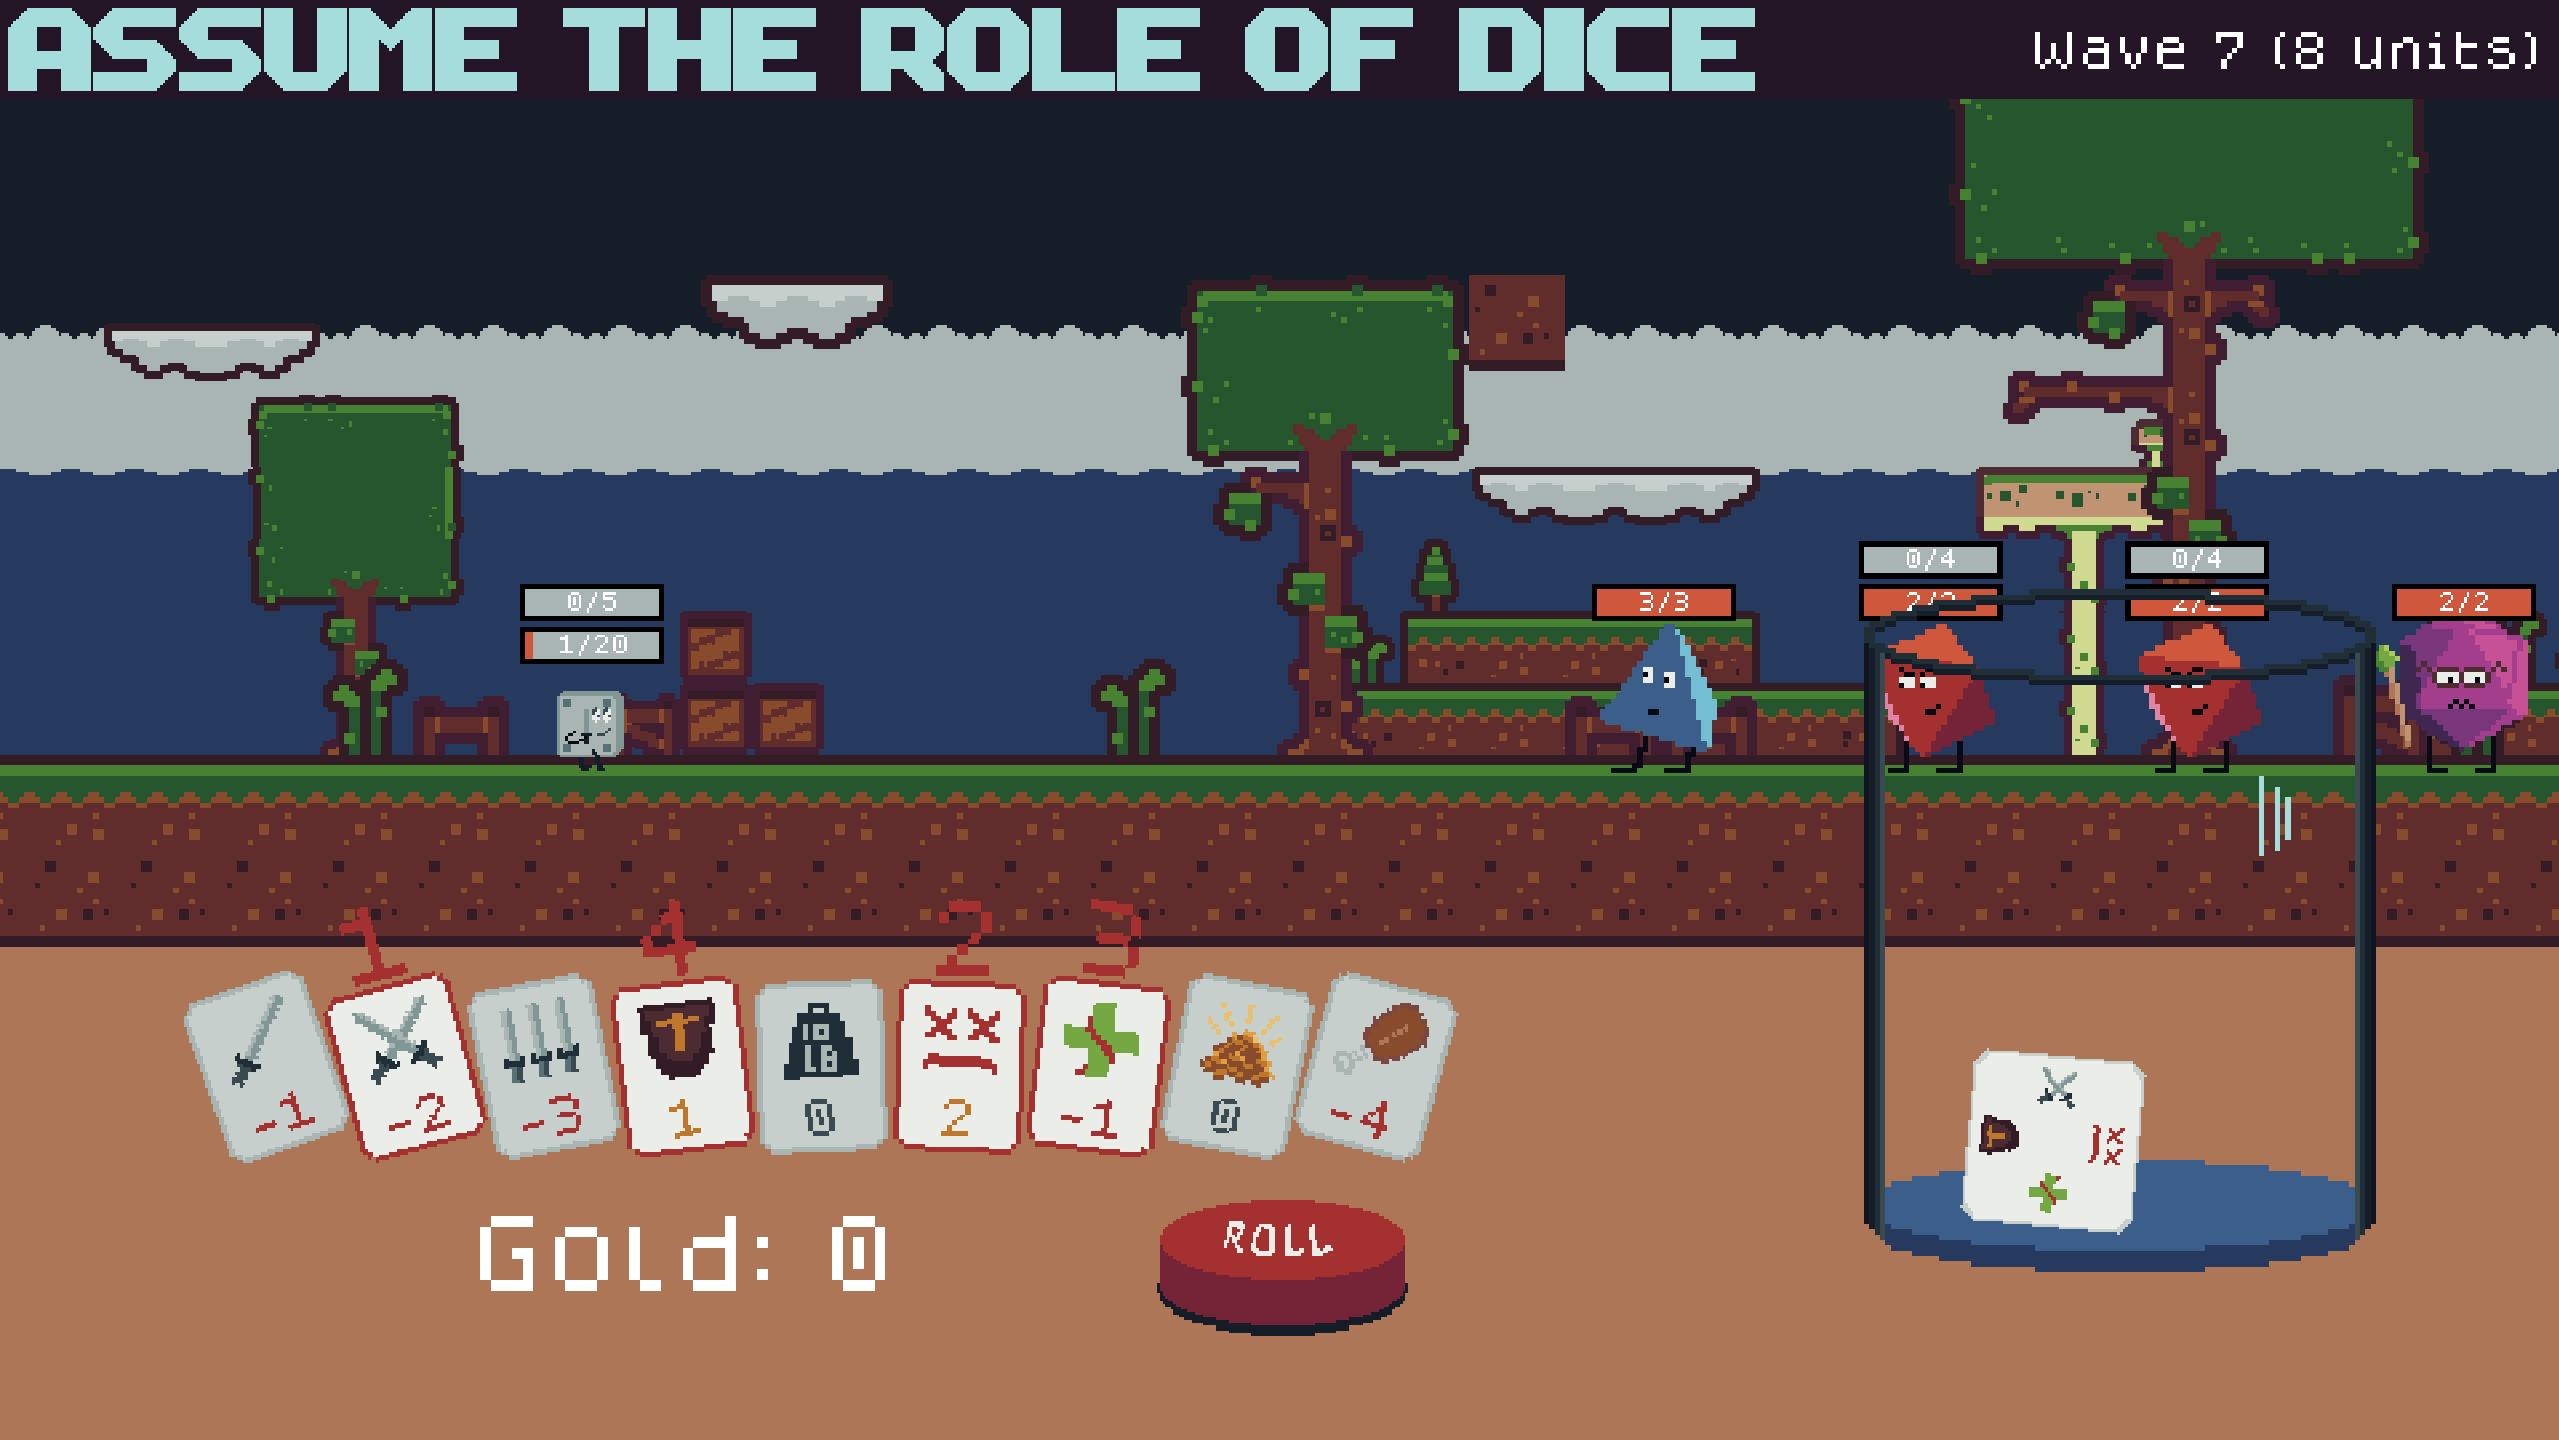 The Role of Dice